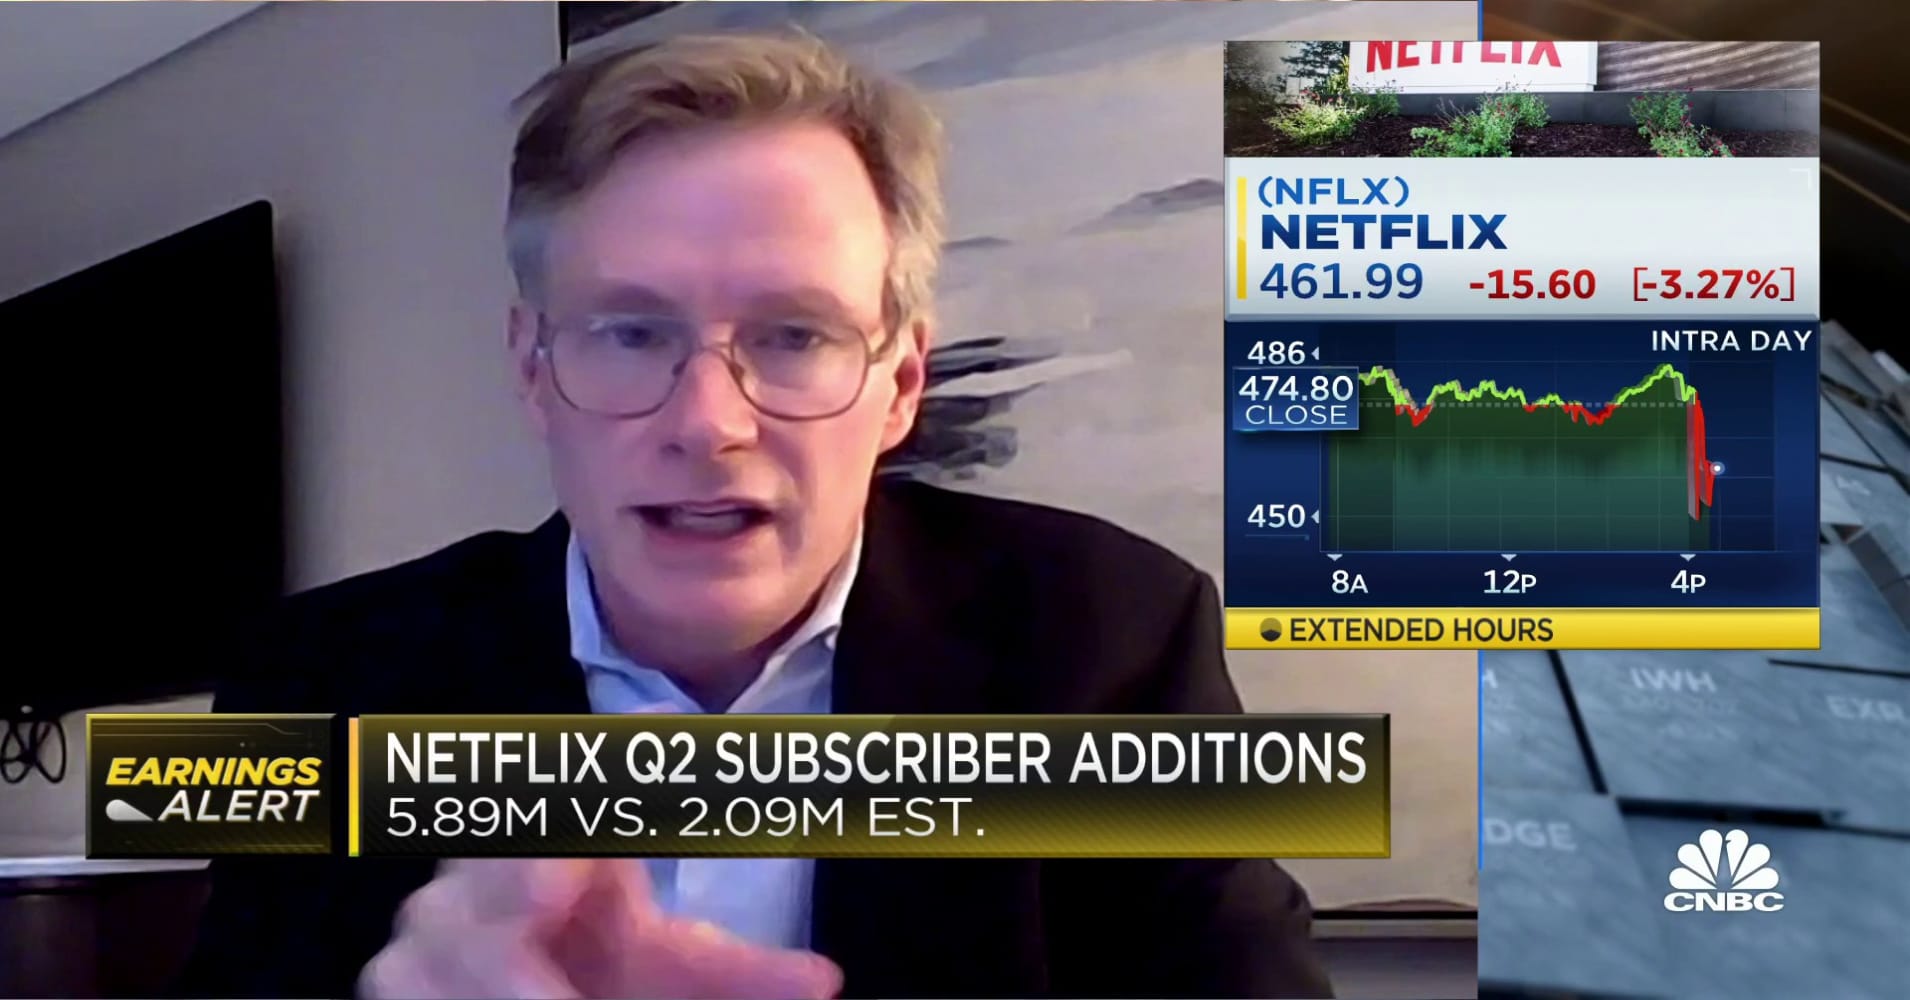 Netflix (NFLX) stock forecast for 2025: End to cable TV?